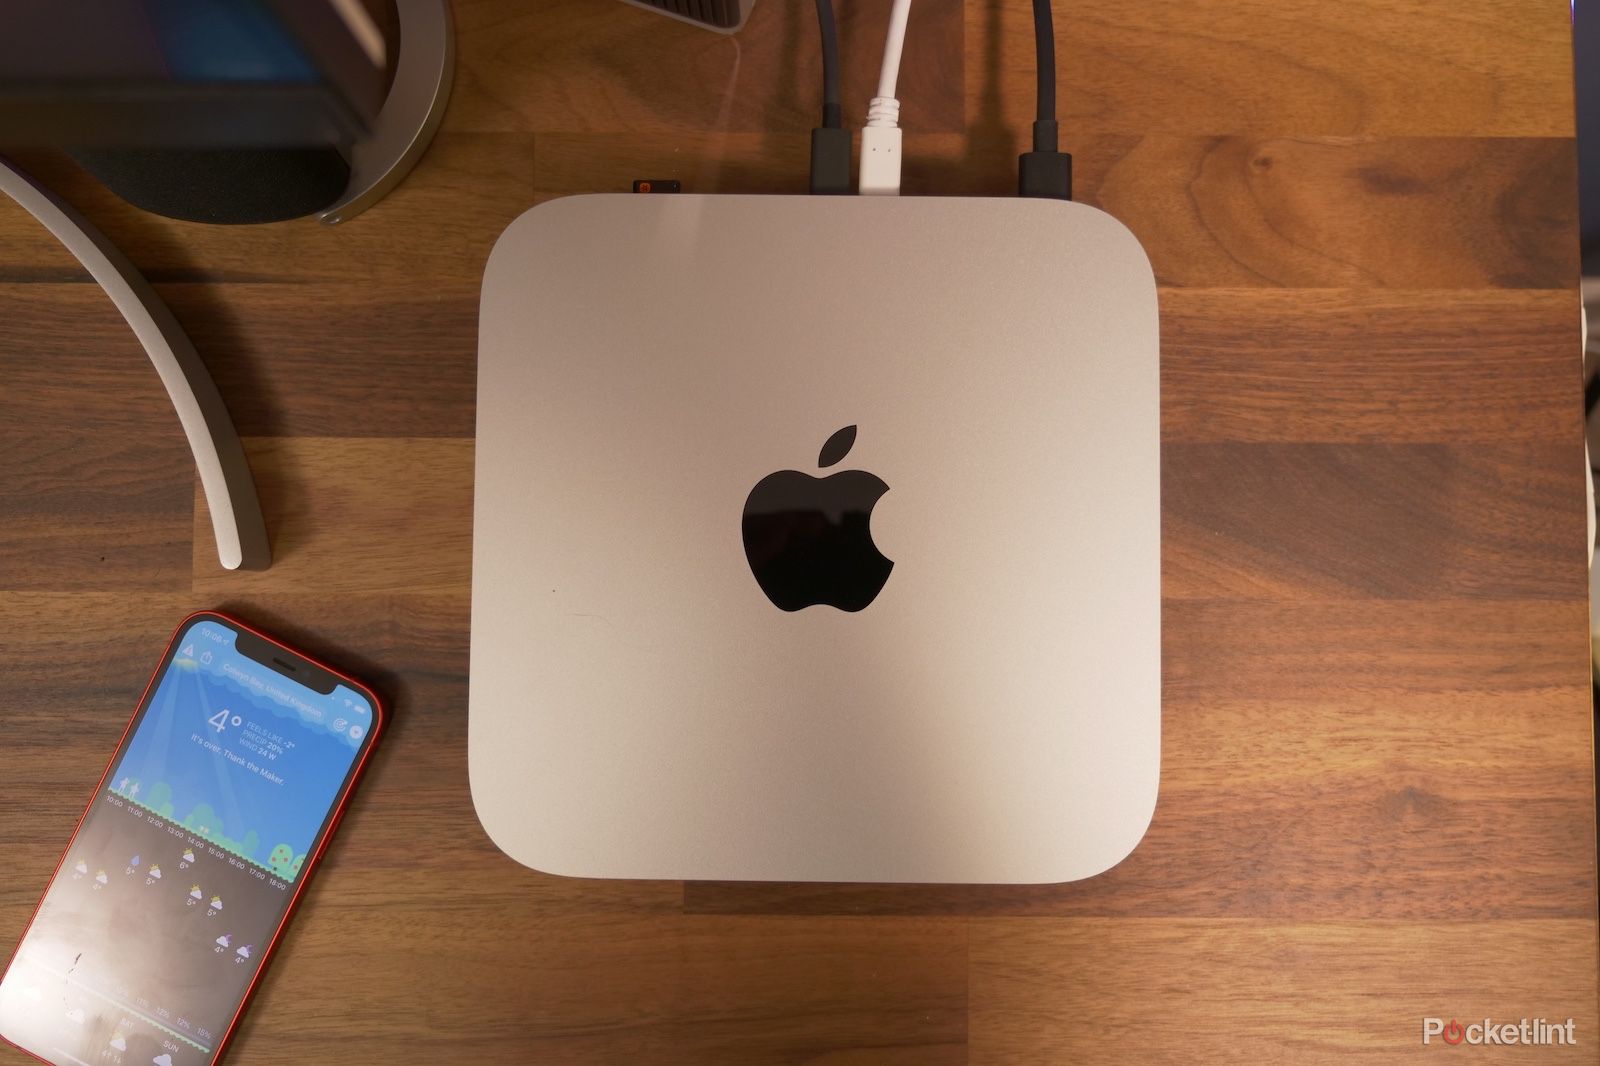 Unreleased Mac Mini accidentally pops up in latest Studio Display update - is an announcement coming at WWDC? photo 1